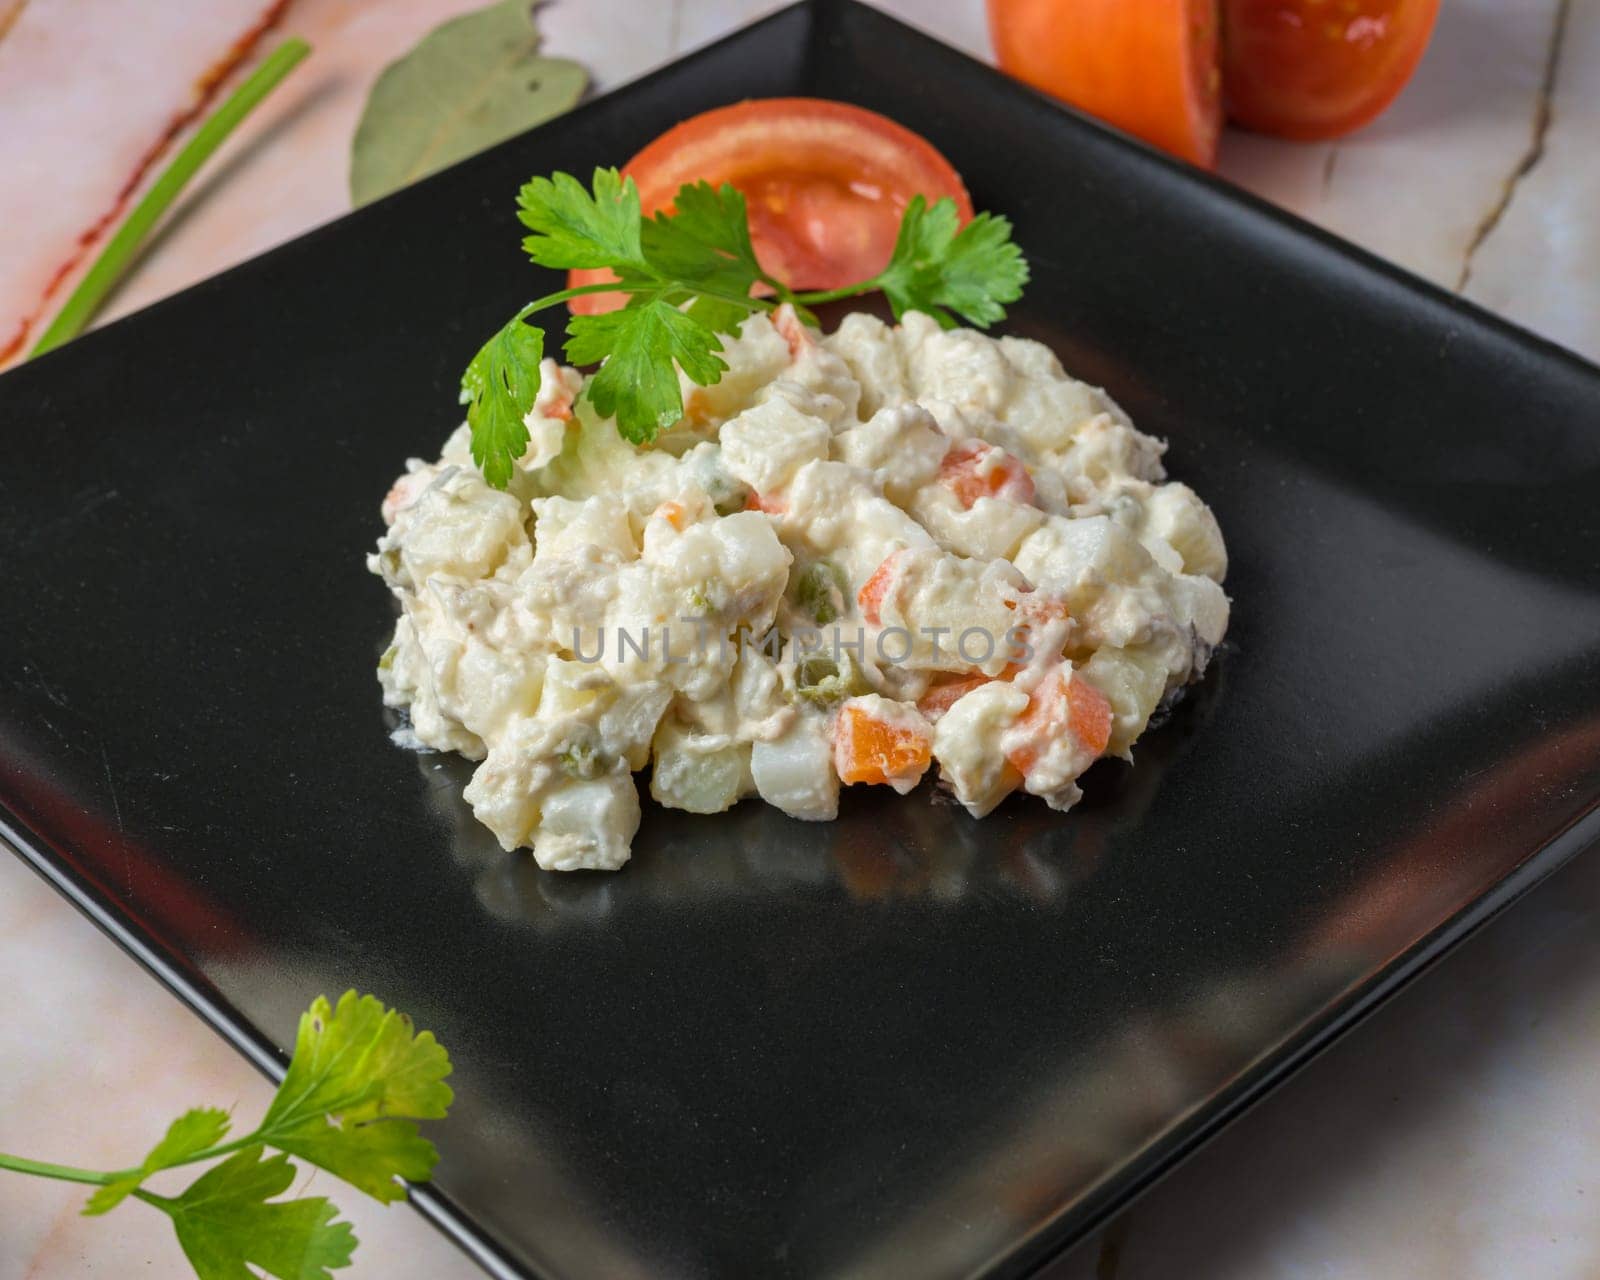 Russian salad Creamy potato salad garnished with parsley on a black plate, typical food, typical mediterranean mallorcan cuisine typical from balearic islands mallorca, spain,